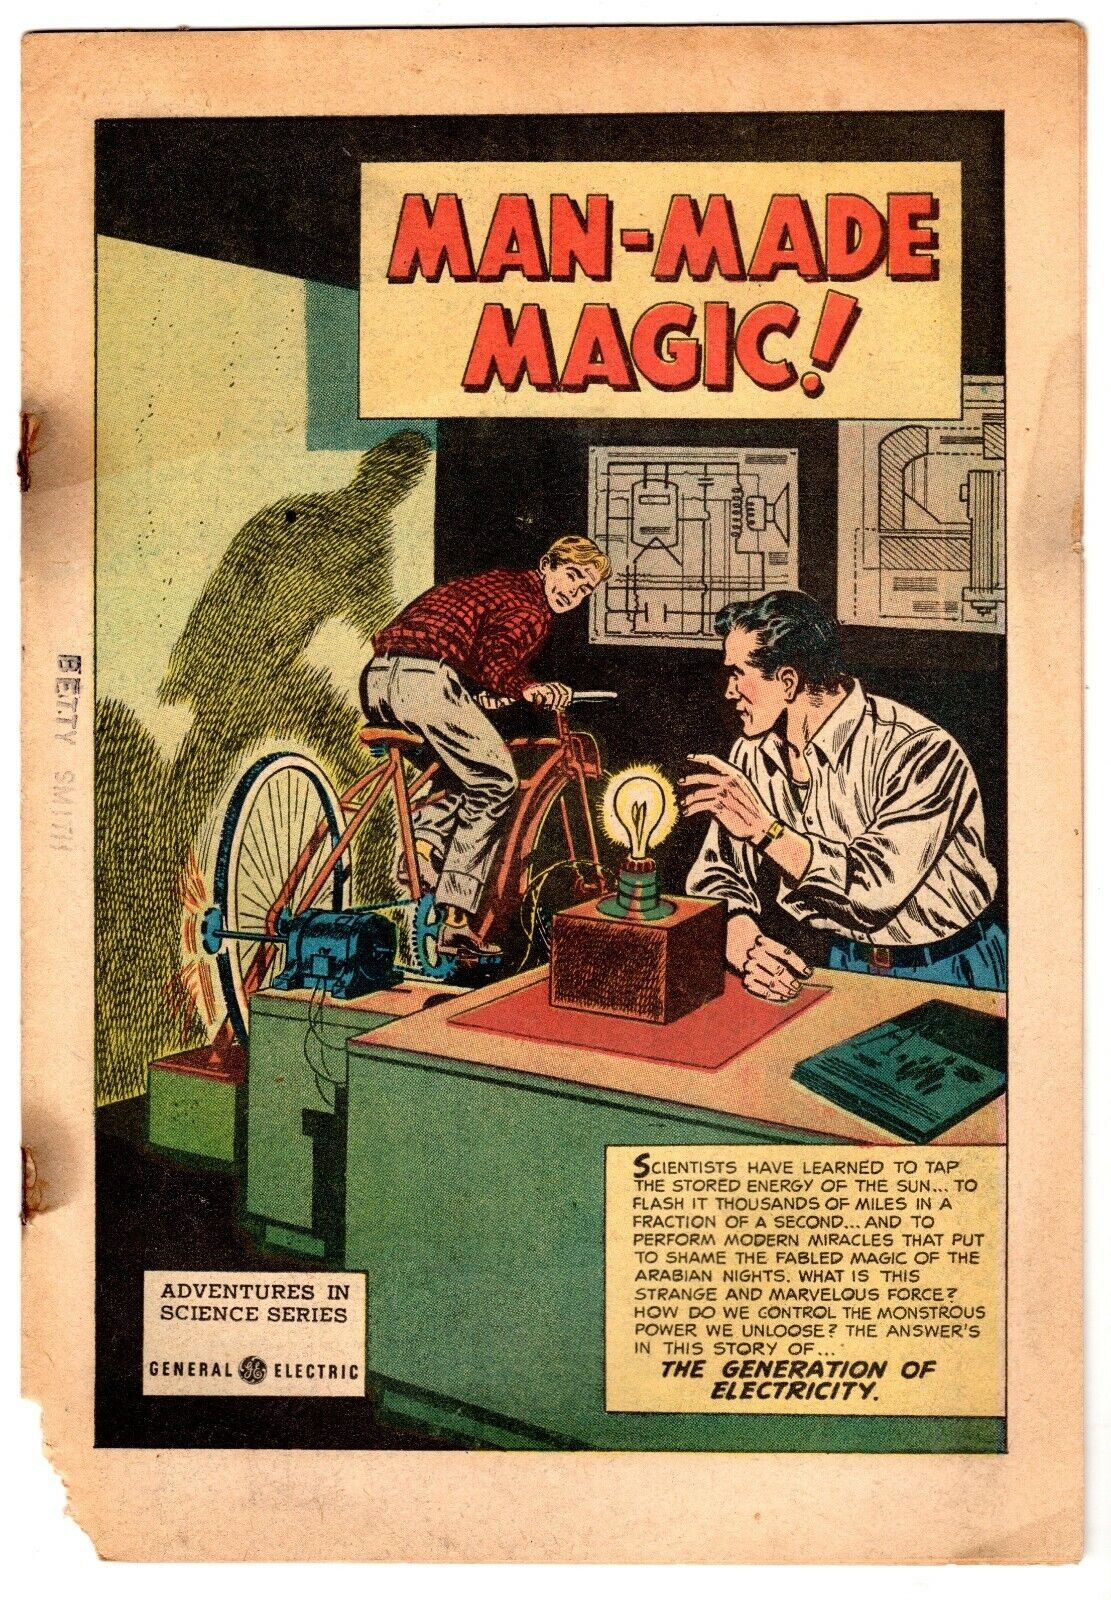 Man-Made Magic - 1953 Adventures in Science General Electric Promo, Good Cond